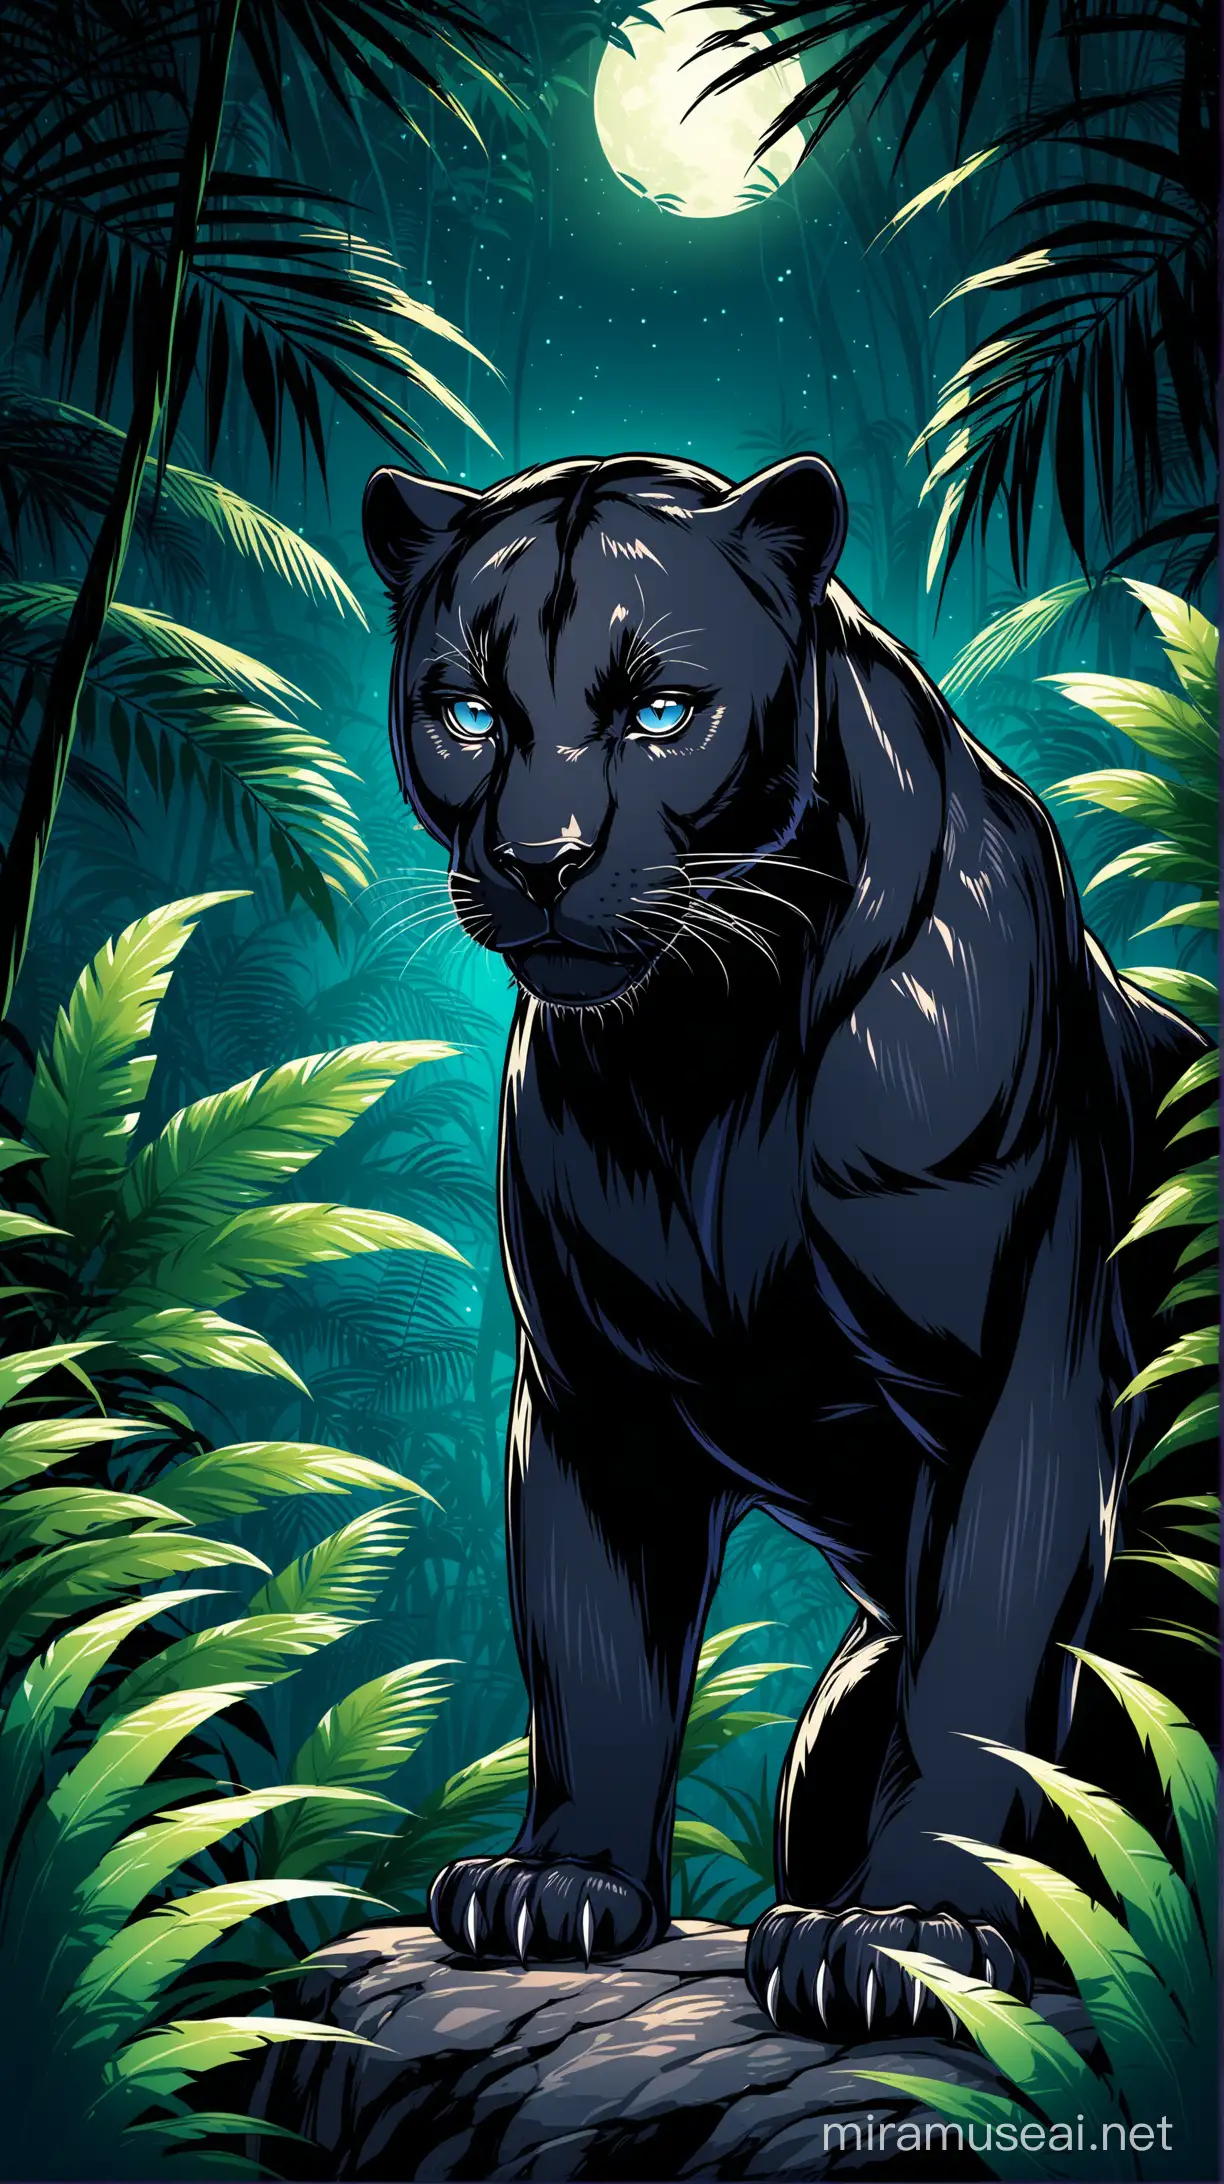 Black Panther Vector in Enigmatic Night Jungle Scene